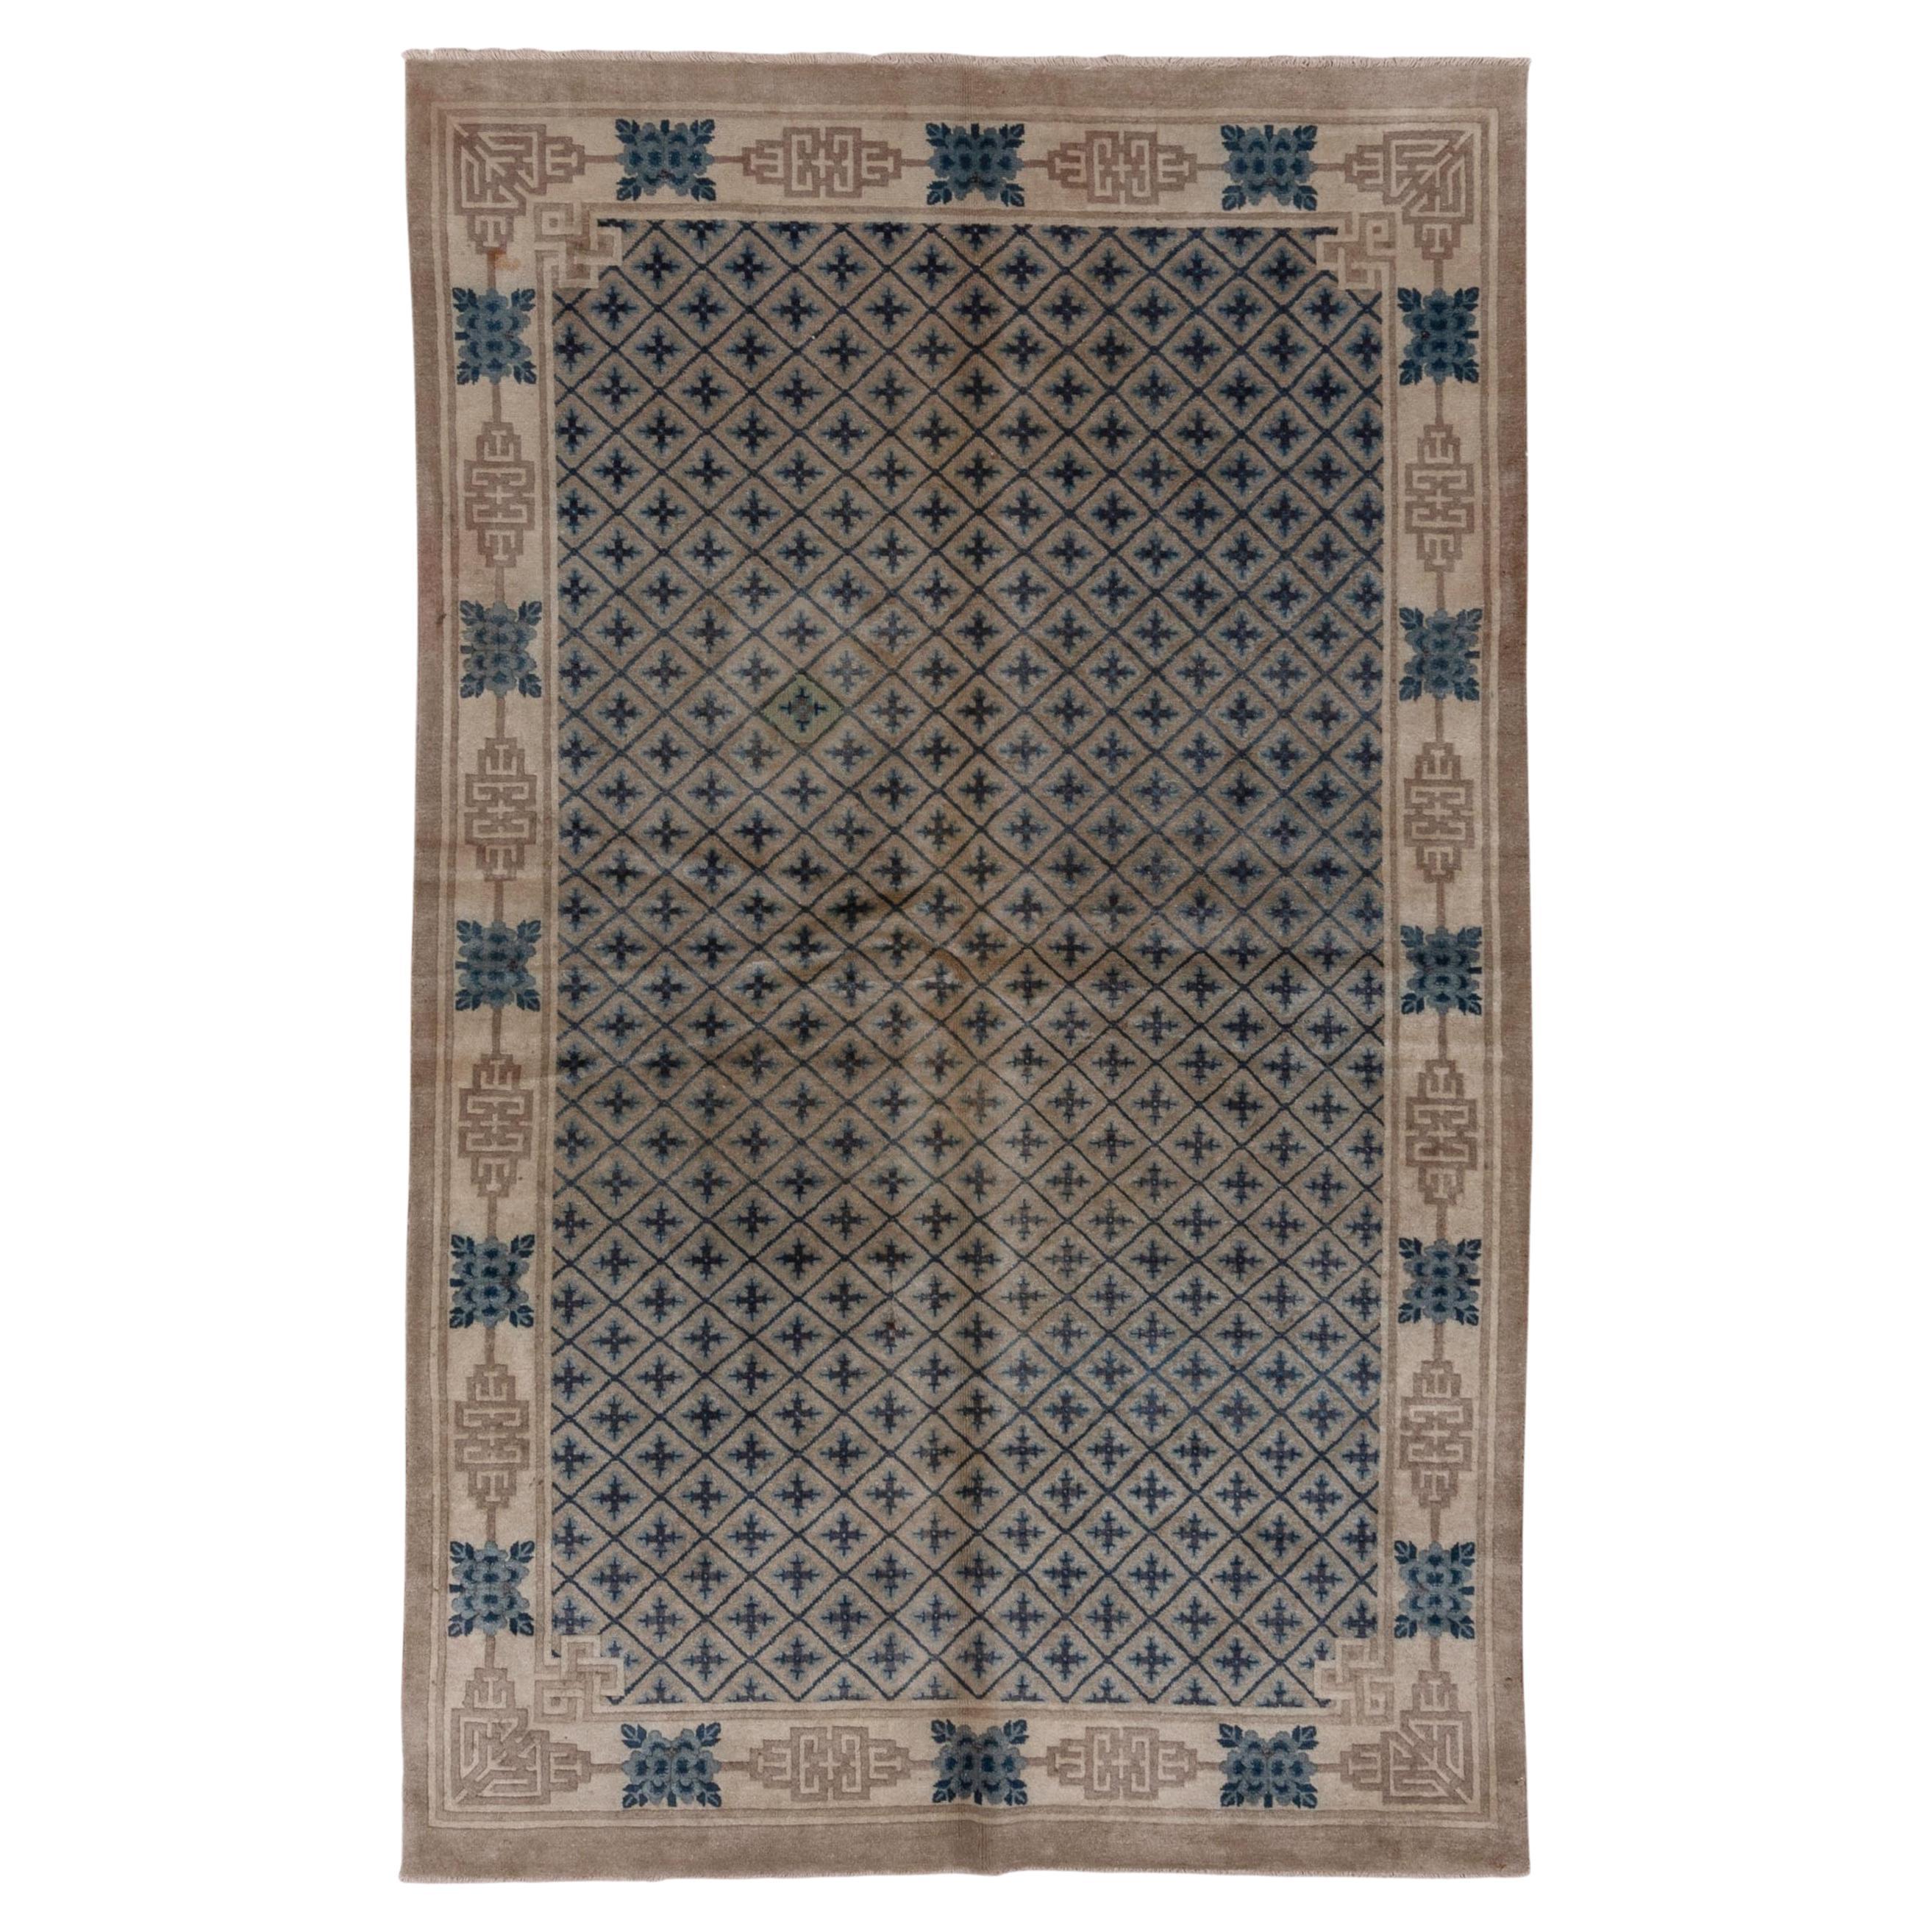 Antique Chinese Rug with Geometric Patterns Allover - Green Blue Khakis For Sale